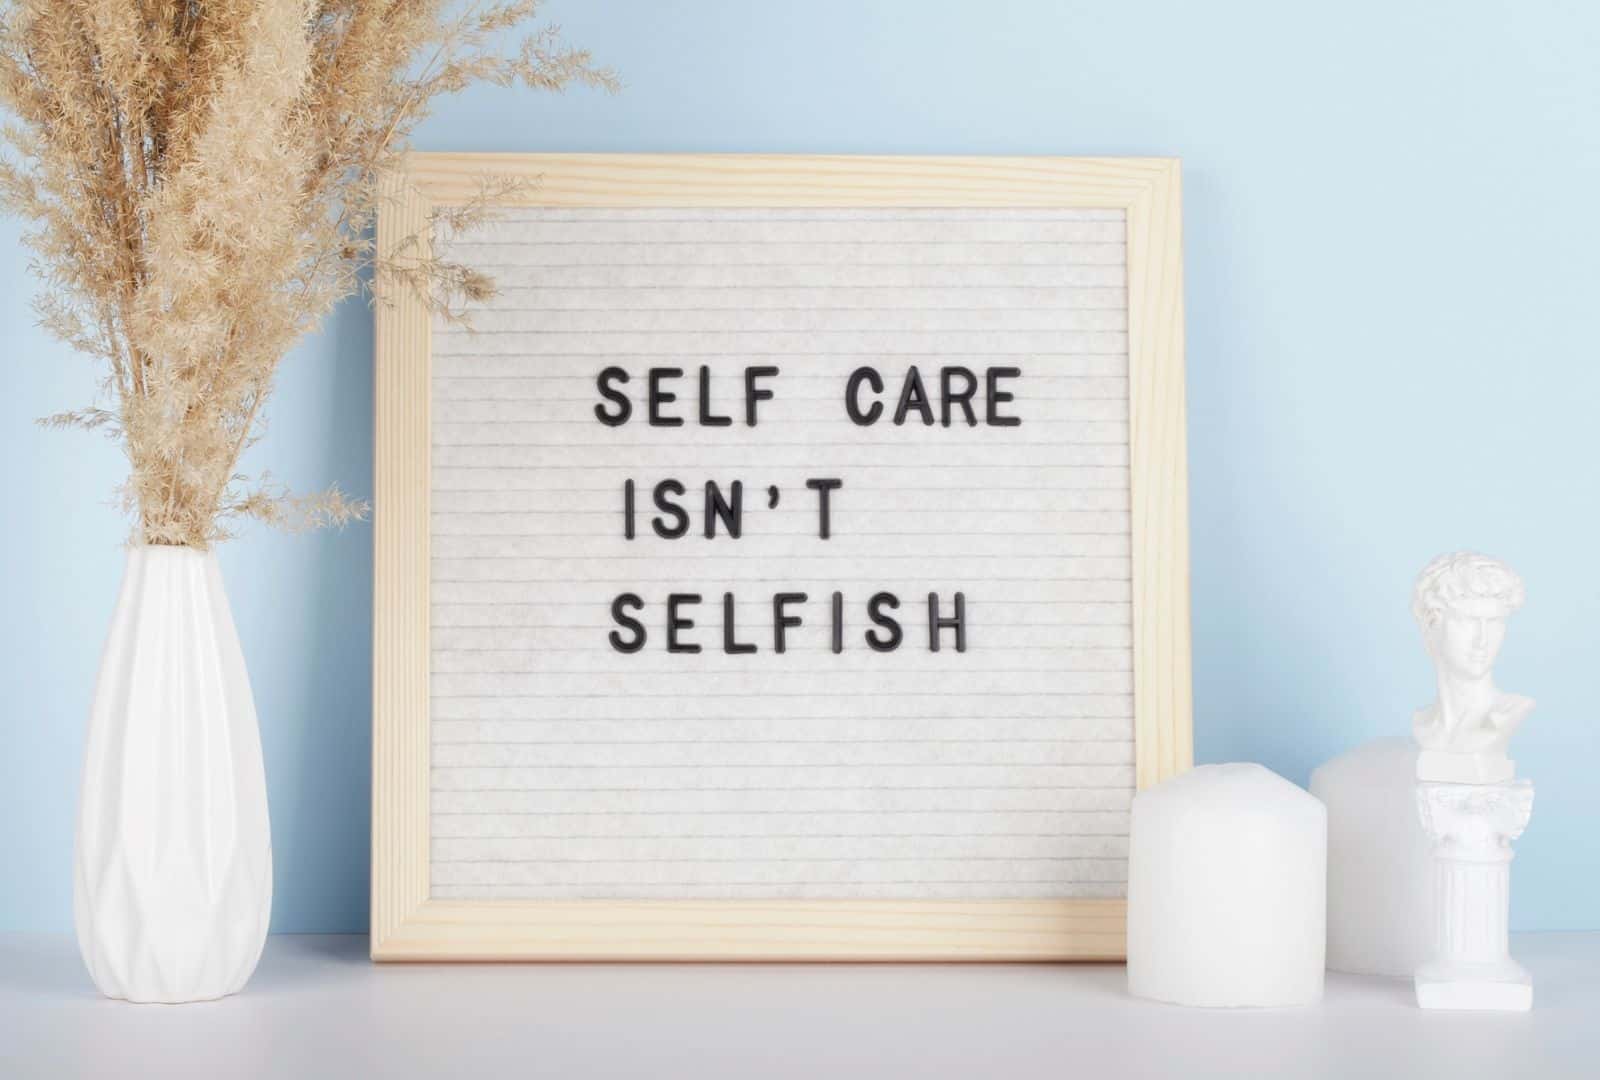 Self-Care Ideas for the Body, Mind, and Spirit